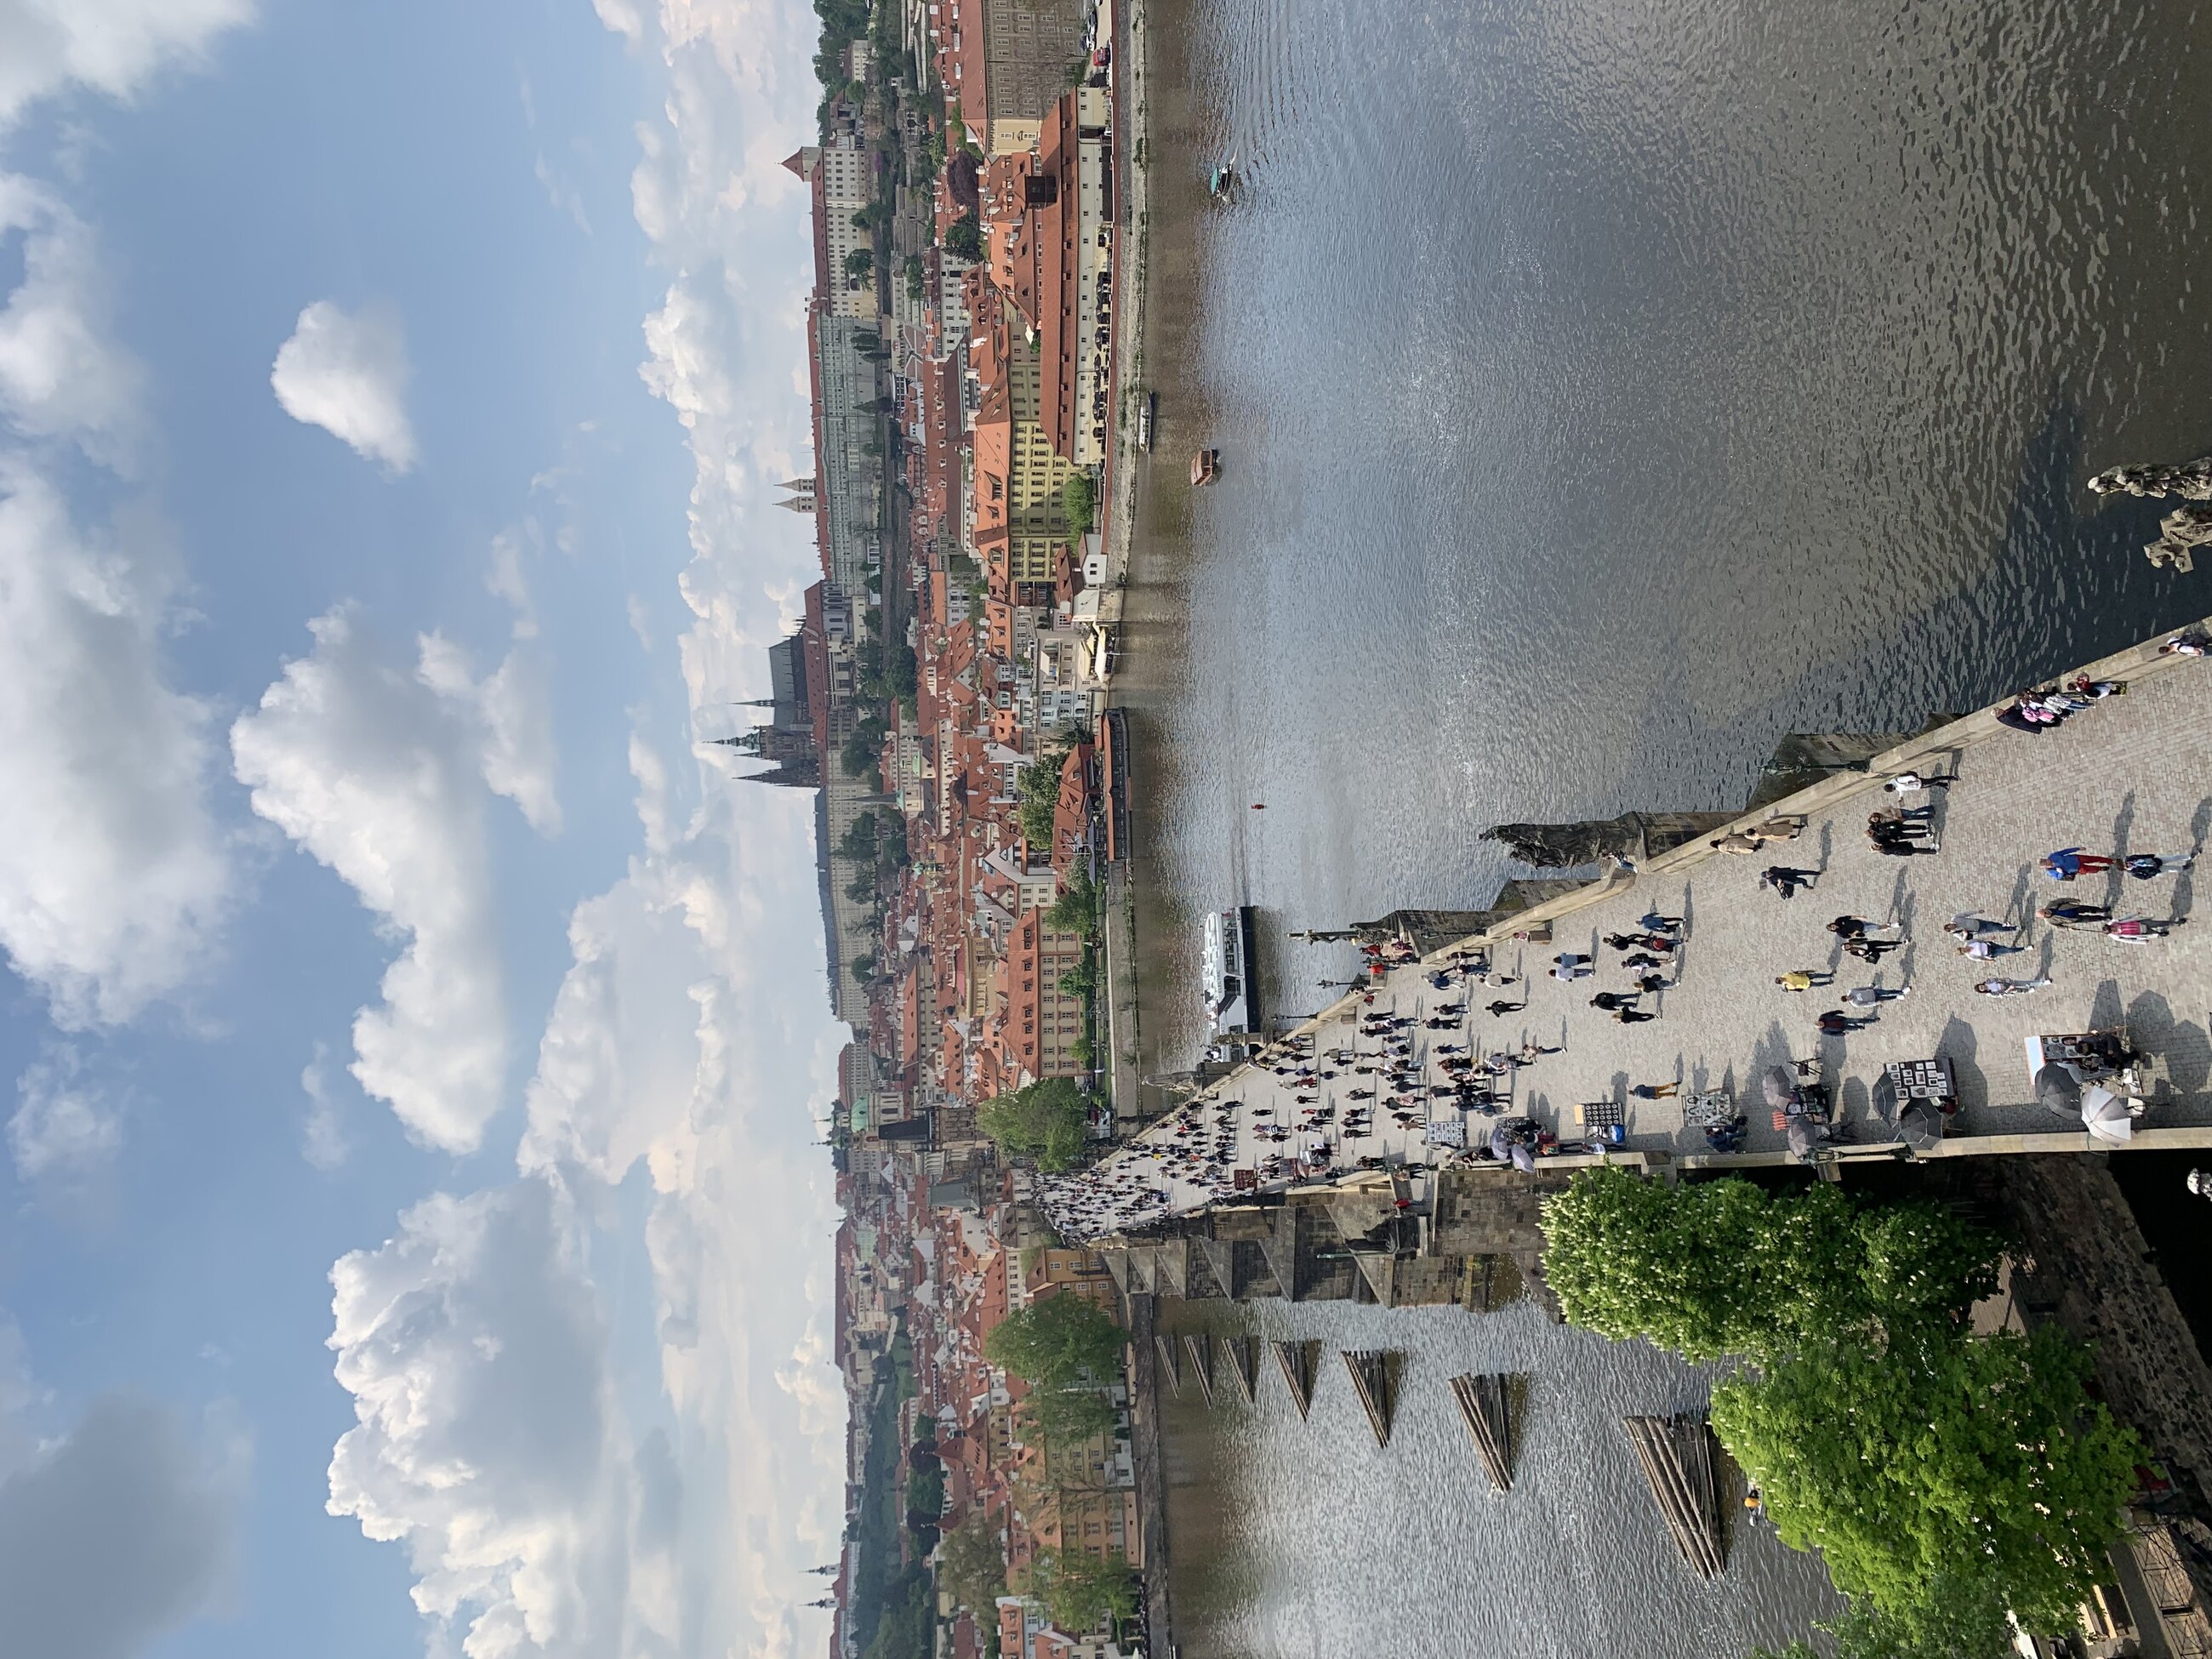 View from the tower on Charles Bridge